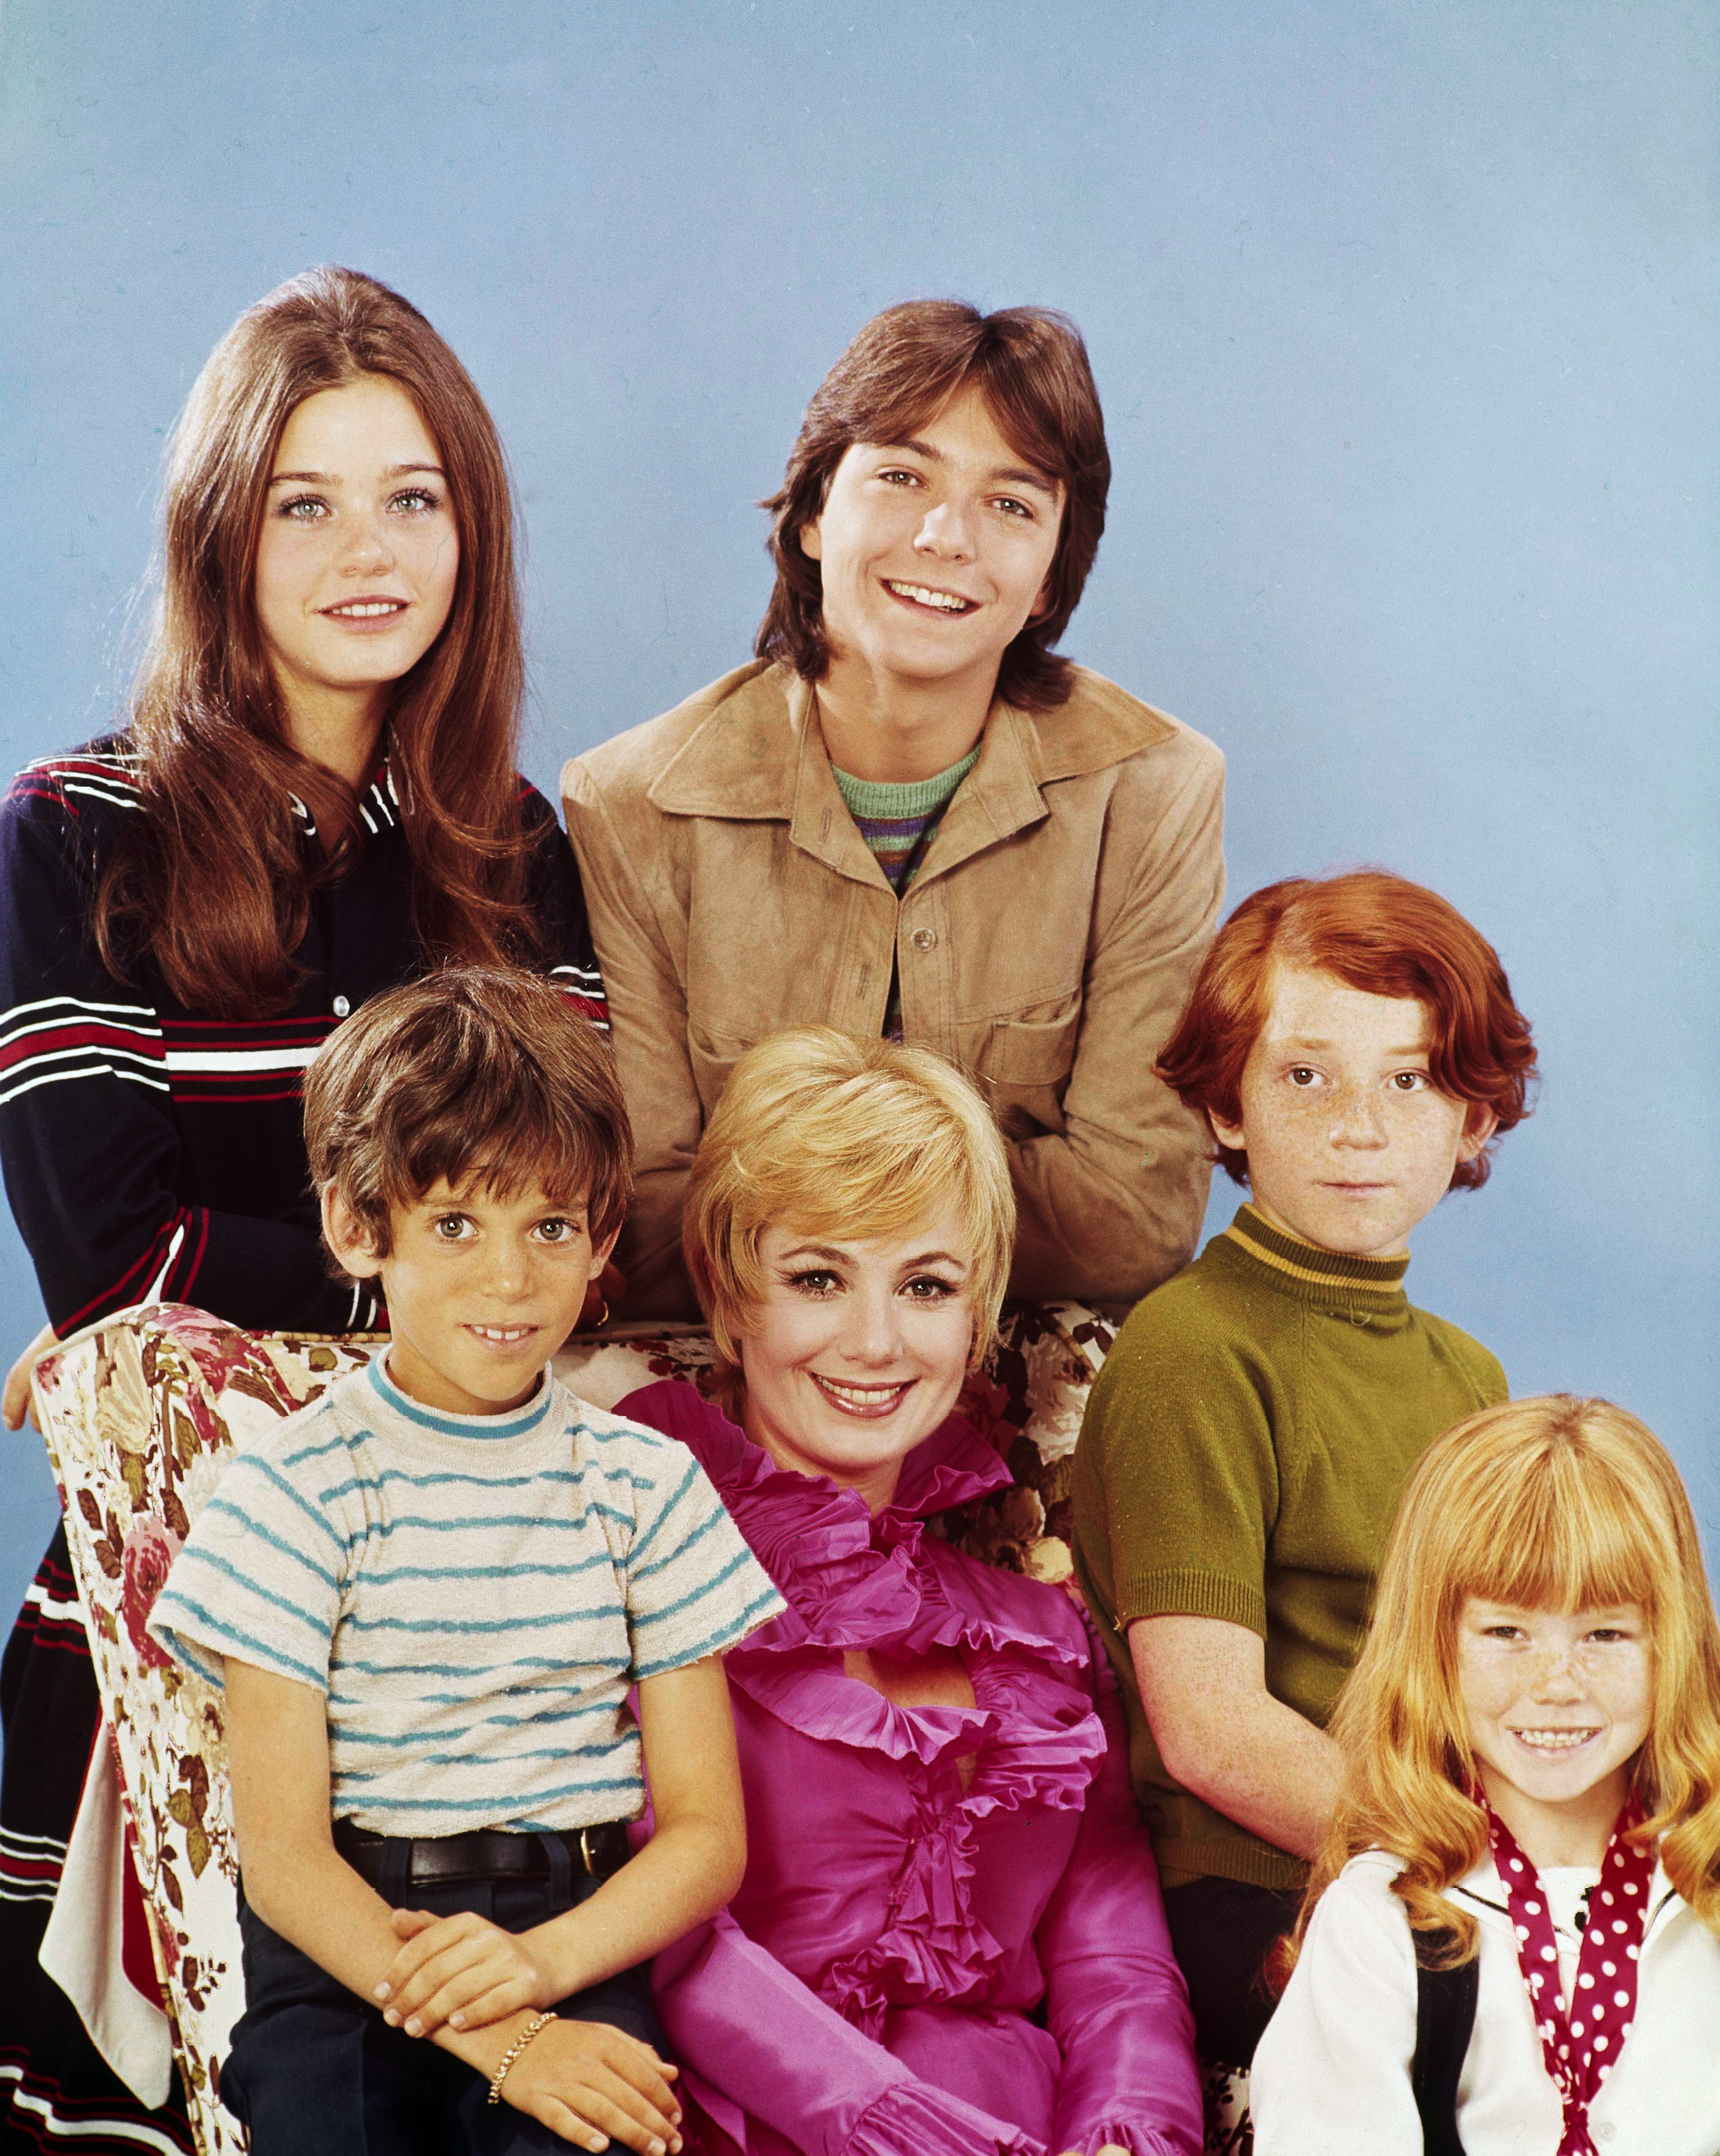 Susan Dey, Jeremy Gelbwaks, David Cassidy, Shirley Jones, Danny Bonaduce, and Suzanne Crough photographed for "The Partridge Family," circa 1970. | Source: Getty Images